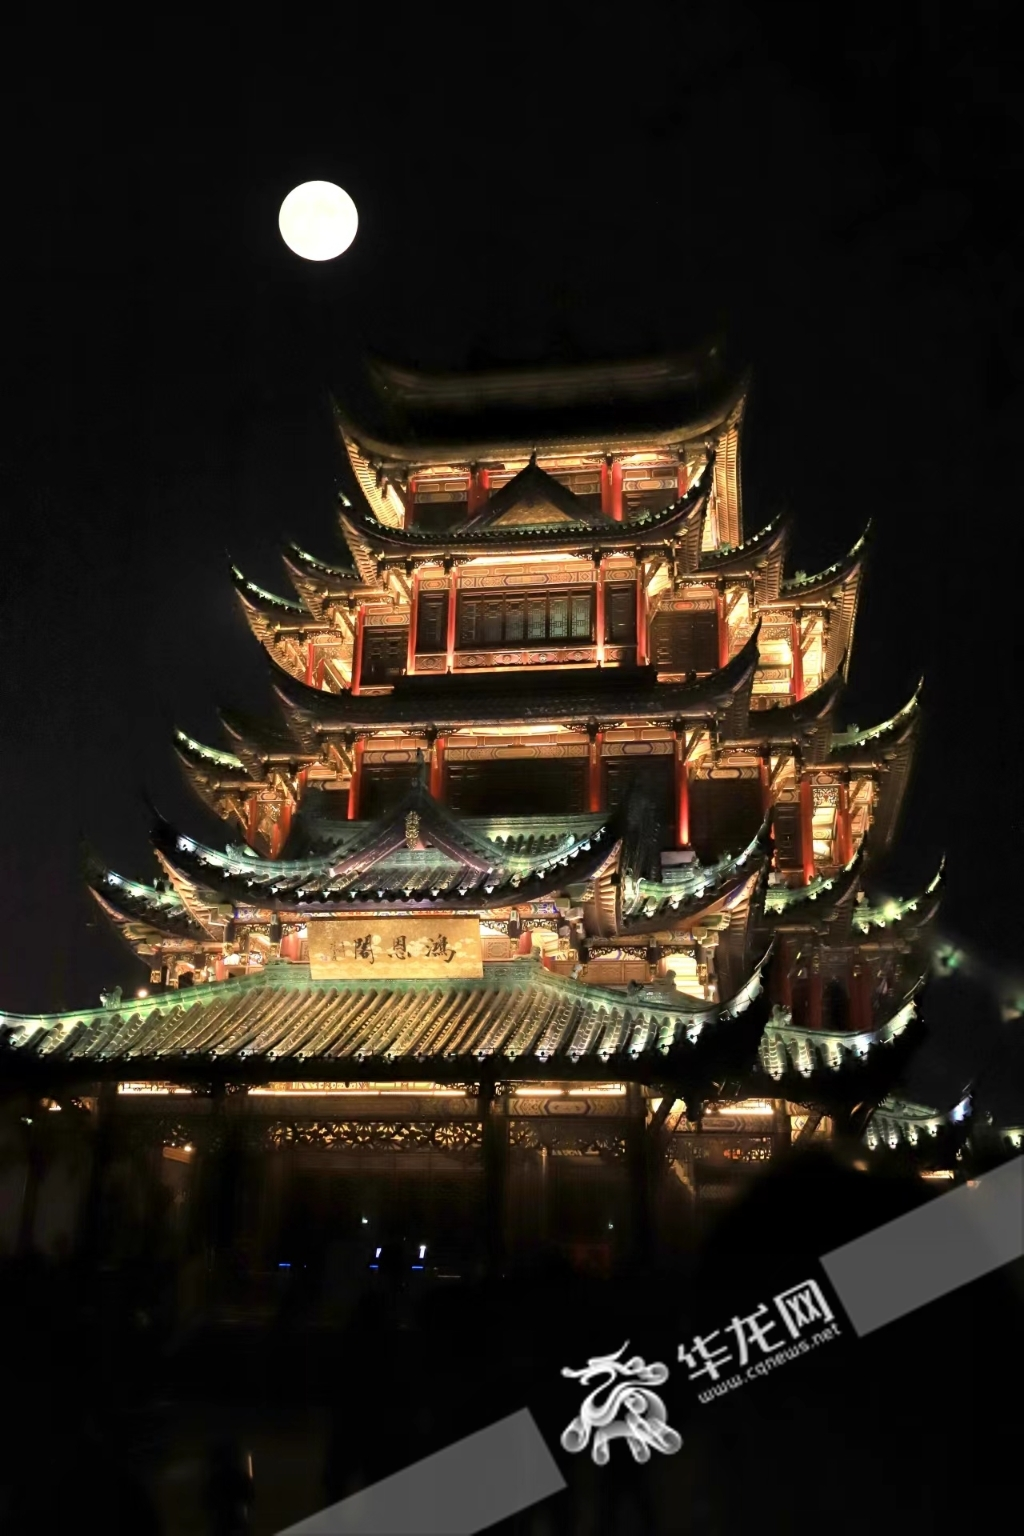 The lighting of Hong'en Pavilion matched the bright moonlight. (Picture made by double exposure technique)